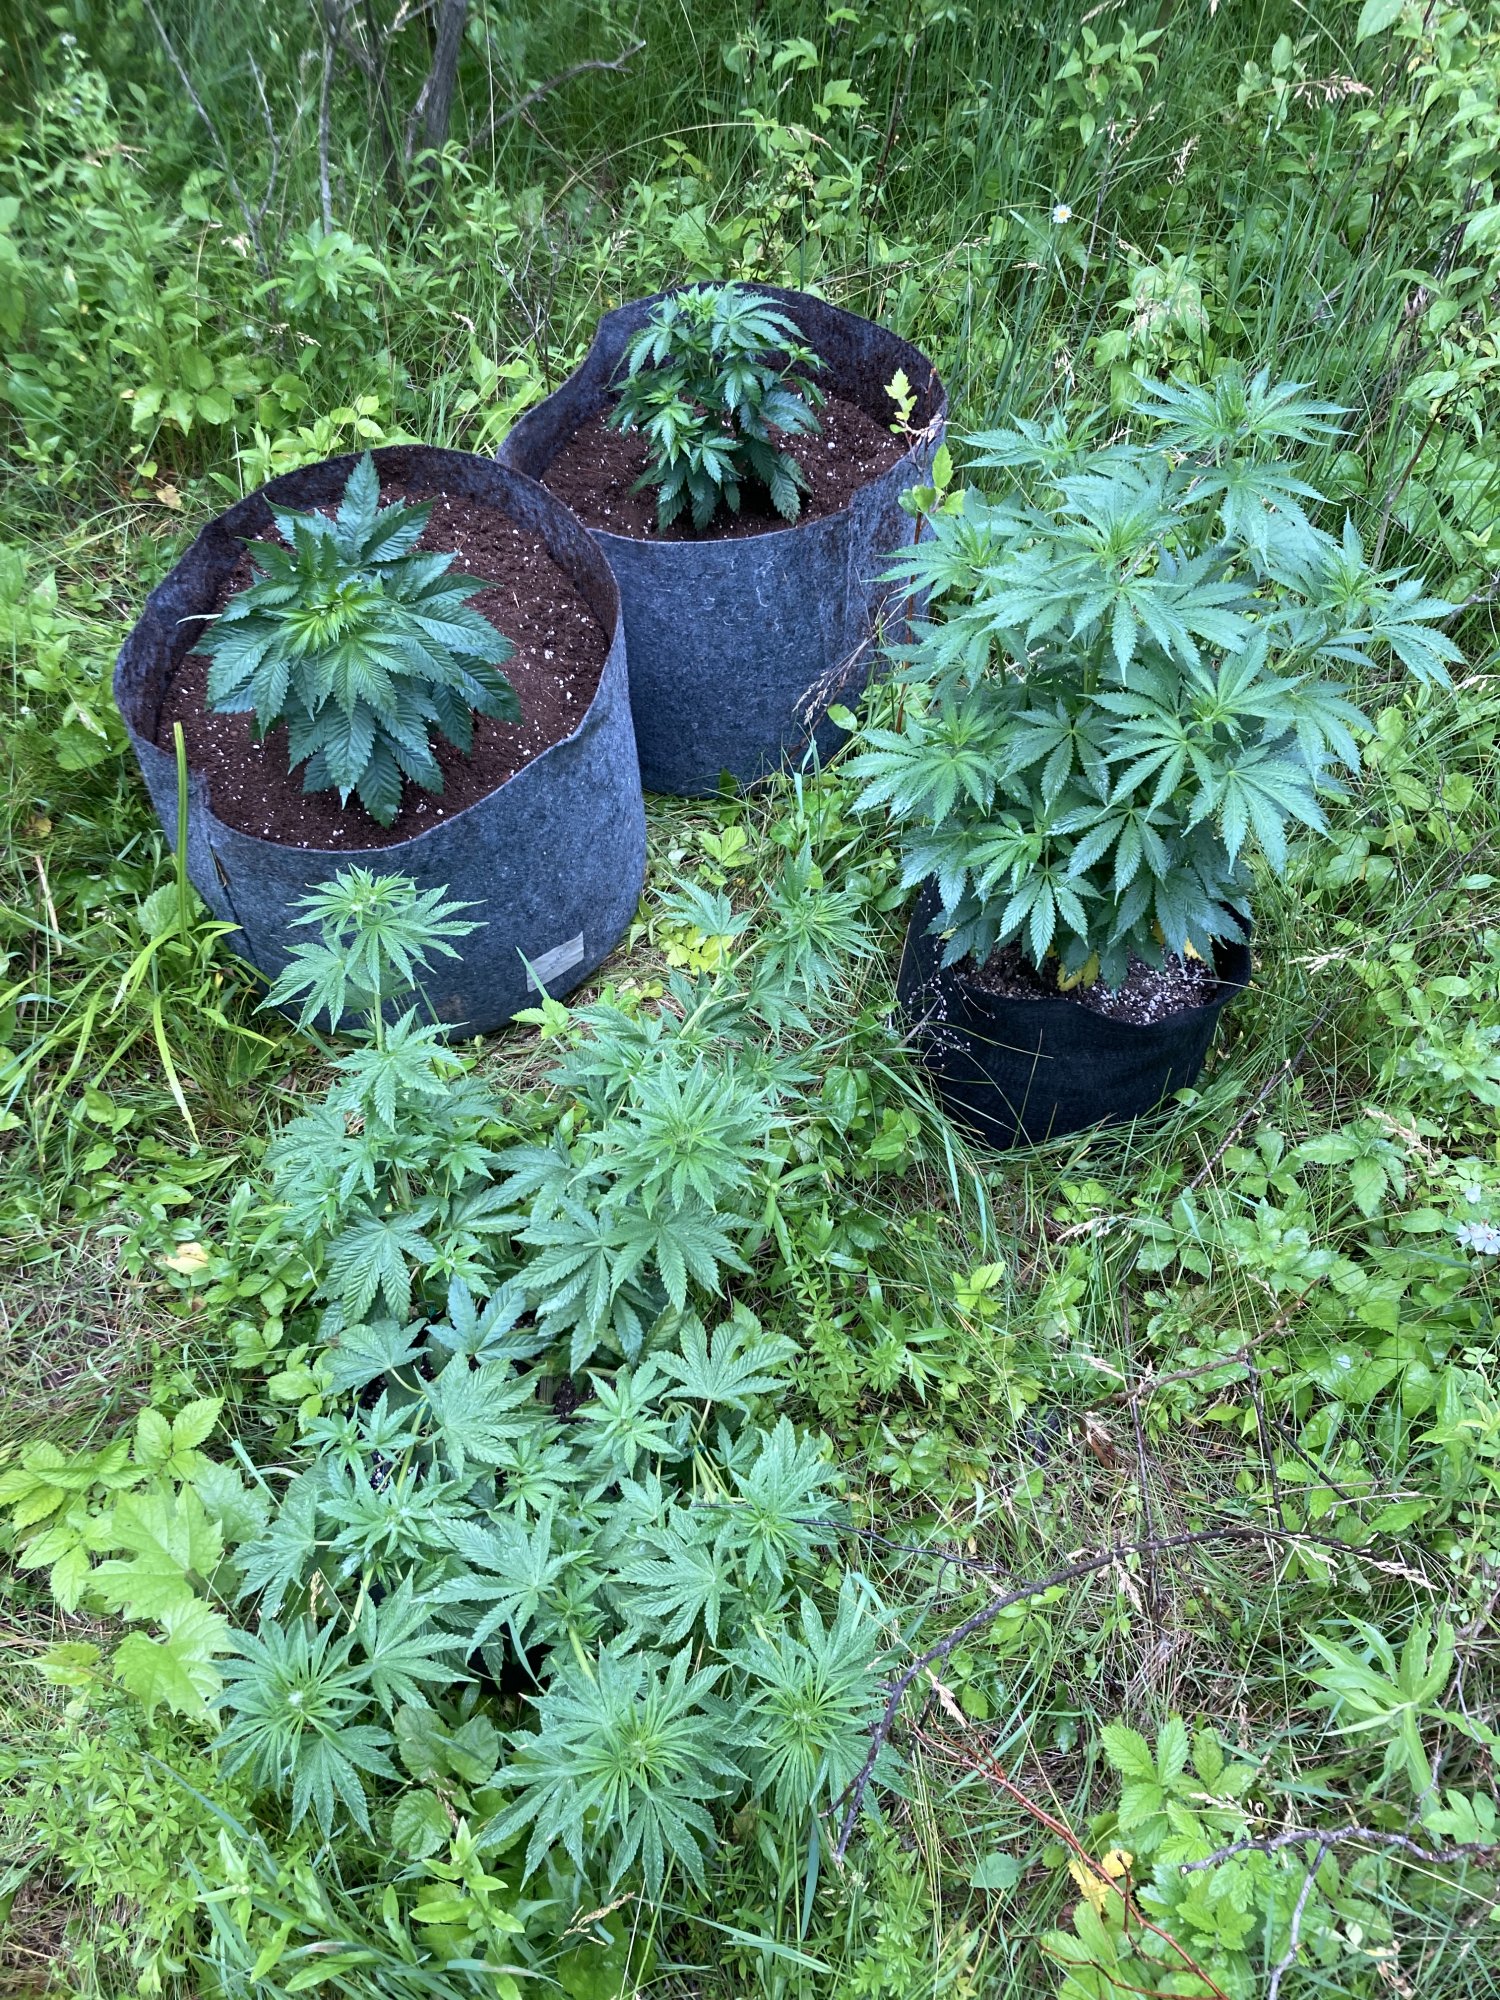 What size pots do you use for outdoor